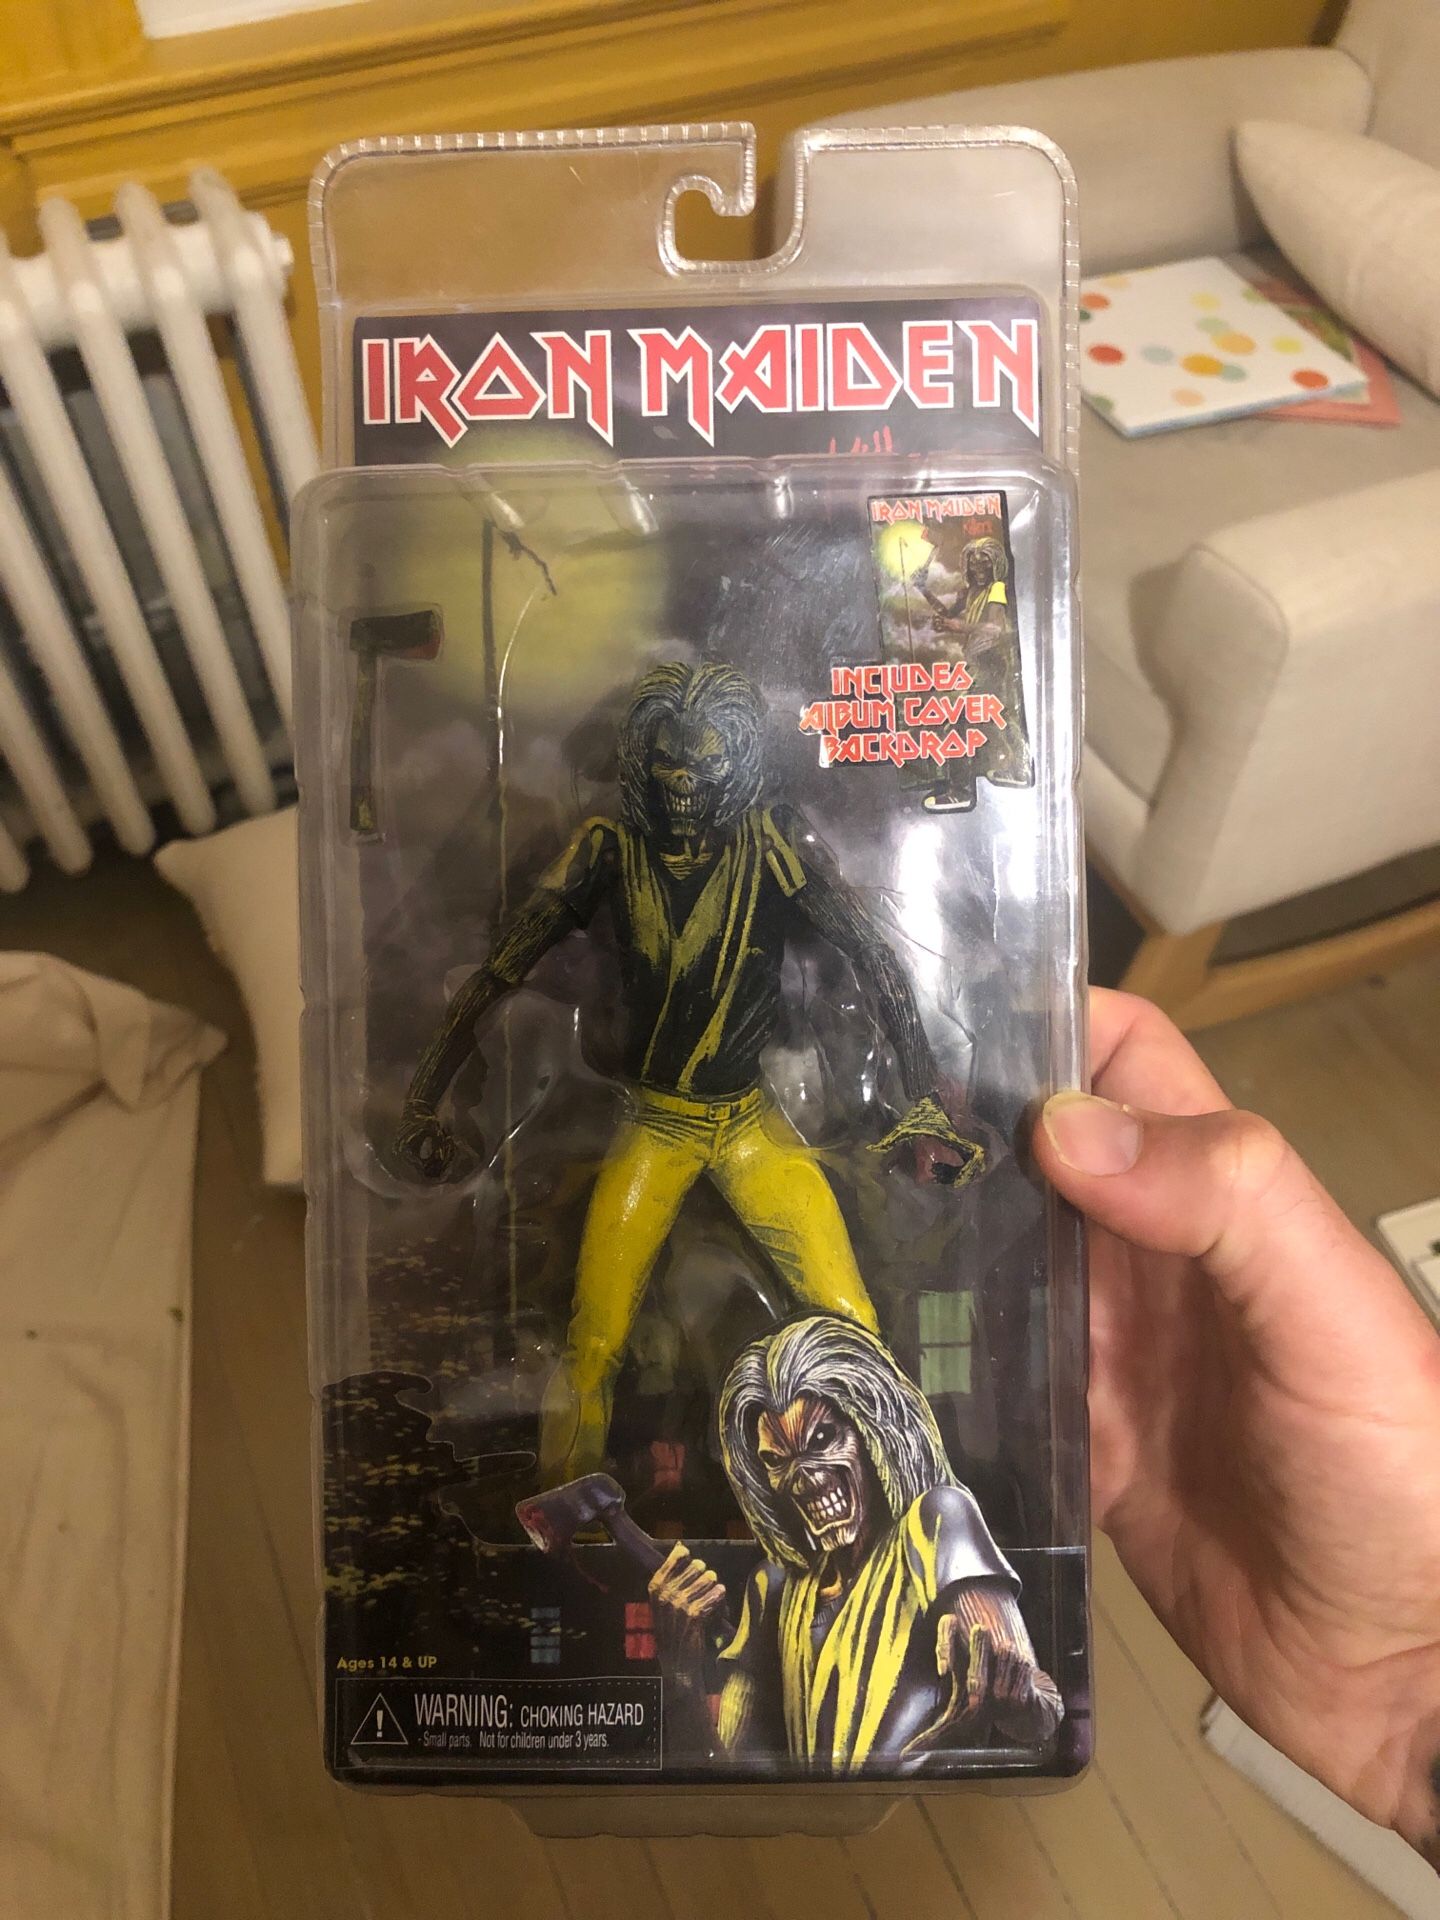 Iron maiden toy new in box